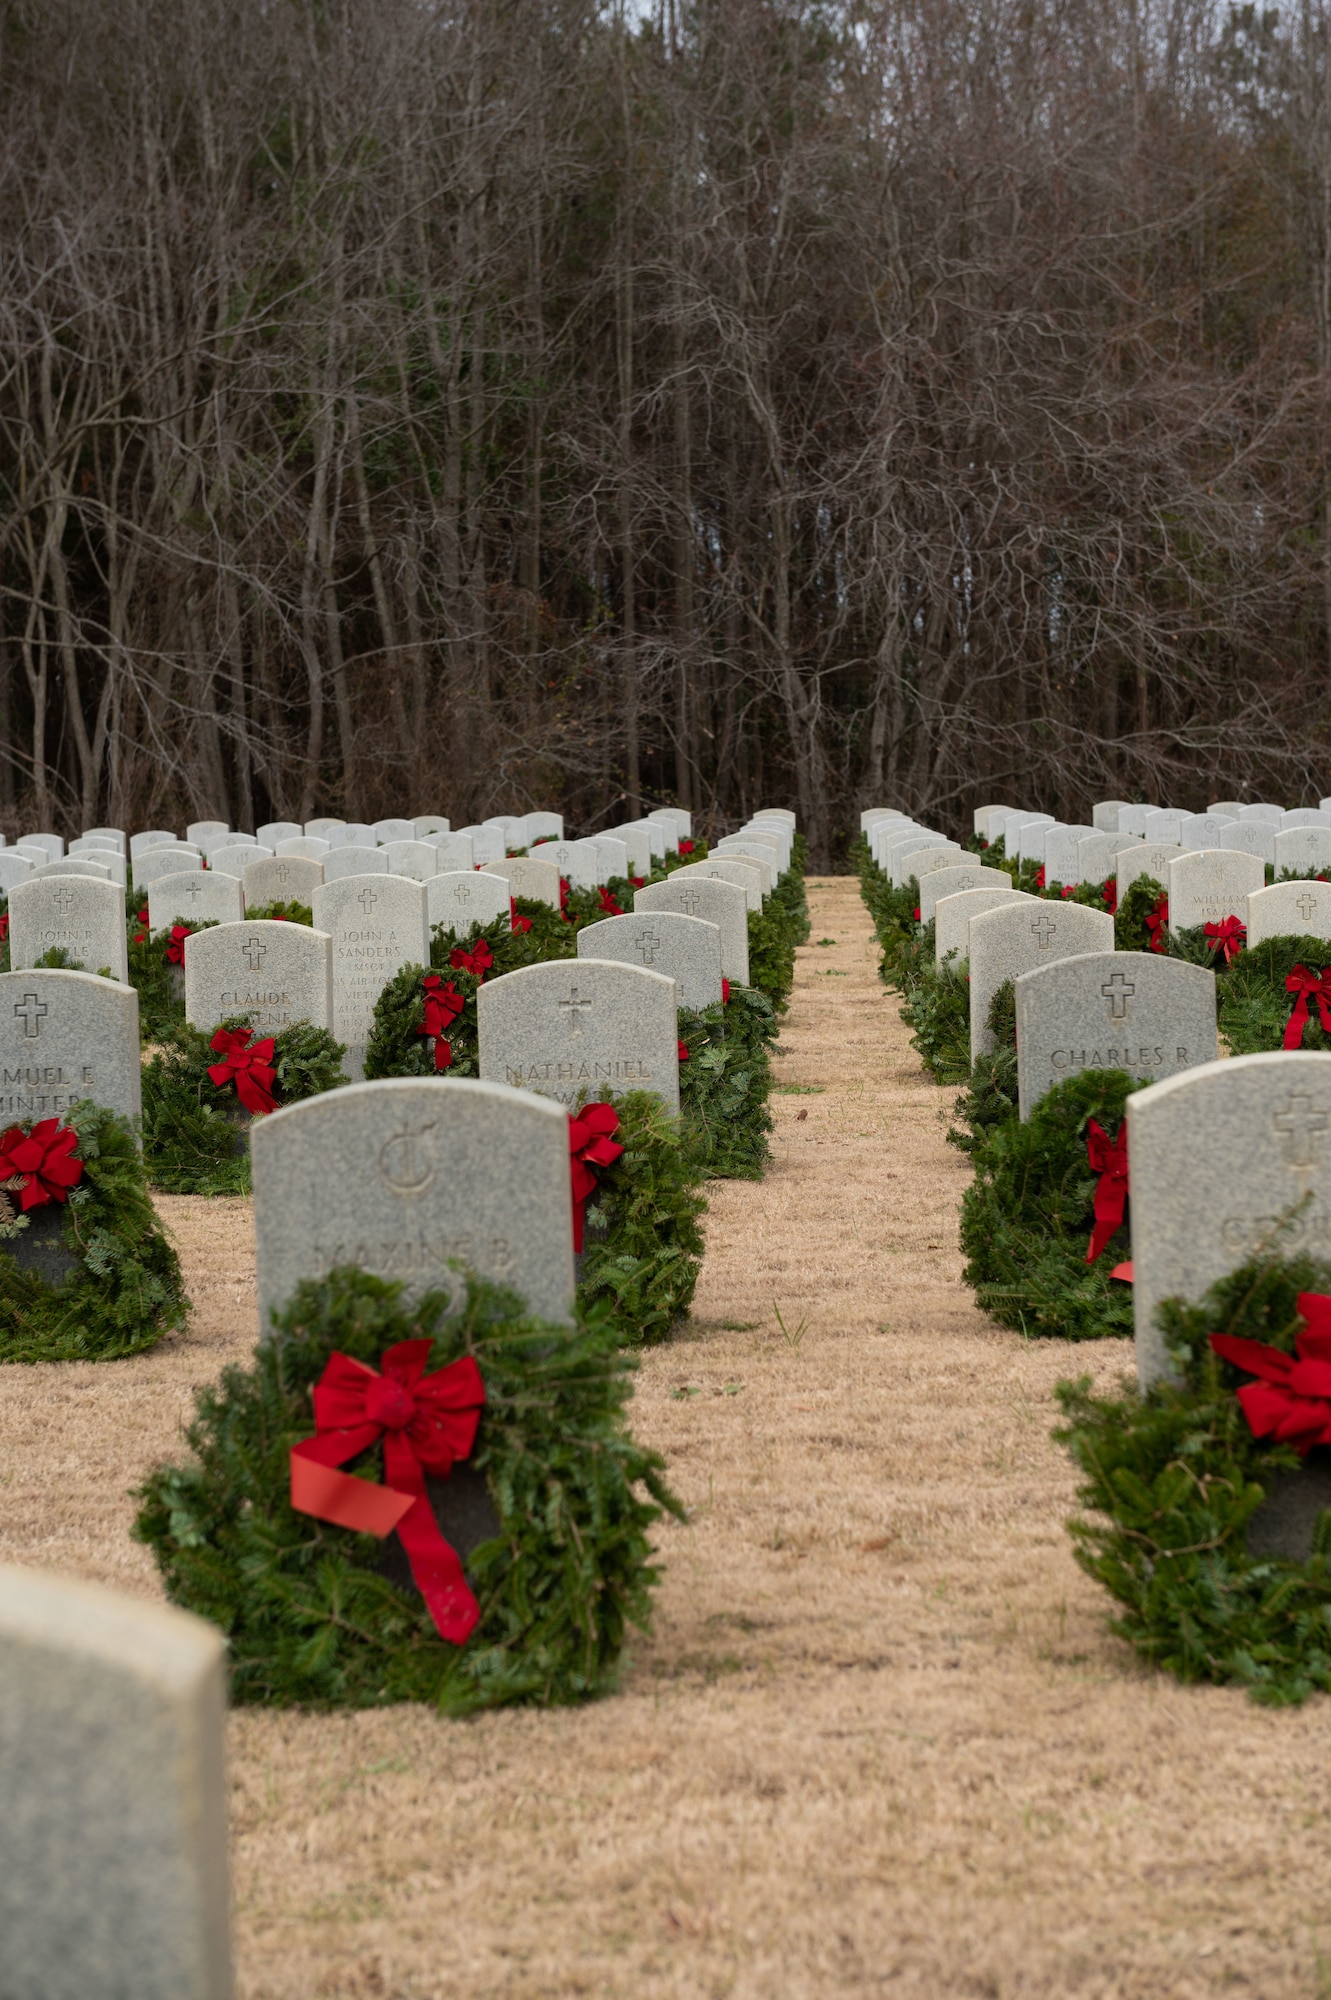 Headstones are decorated with wreaths during Wreaths Across America at Eastern Carolina Veterans Cemetery, Goldsboro, North Carolina, Dec. 17, 2022. The event is held in unity with national cemeteries nationwide to honor those who have served and their families. (U.S. Air Force photo by Airman 1st Class Rebecca Sirimarco-Lang)